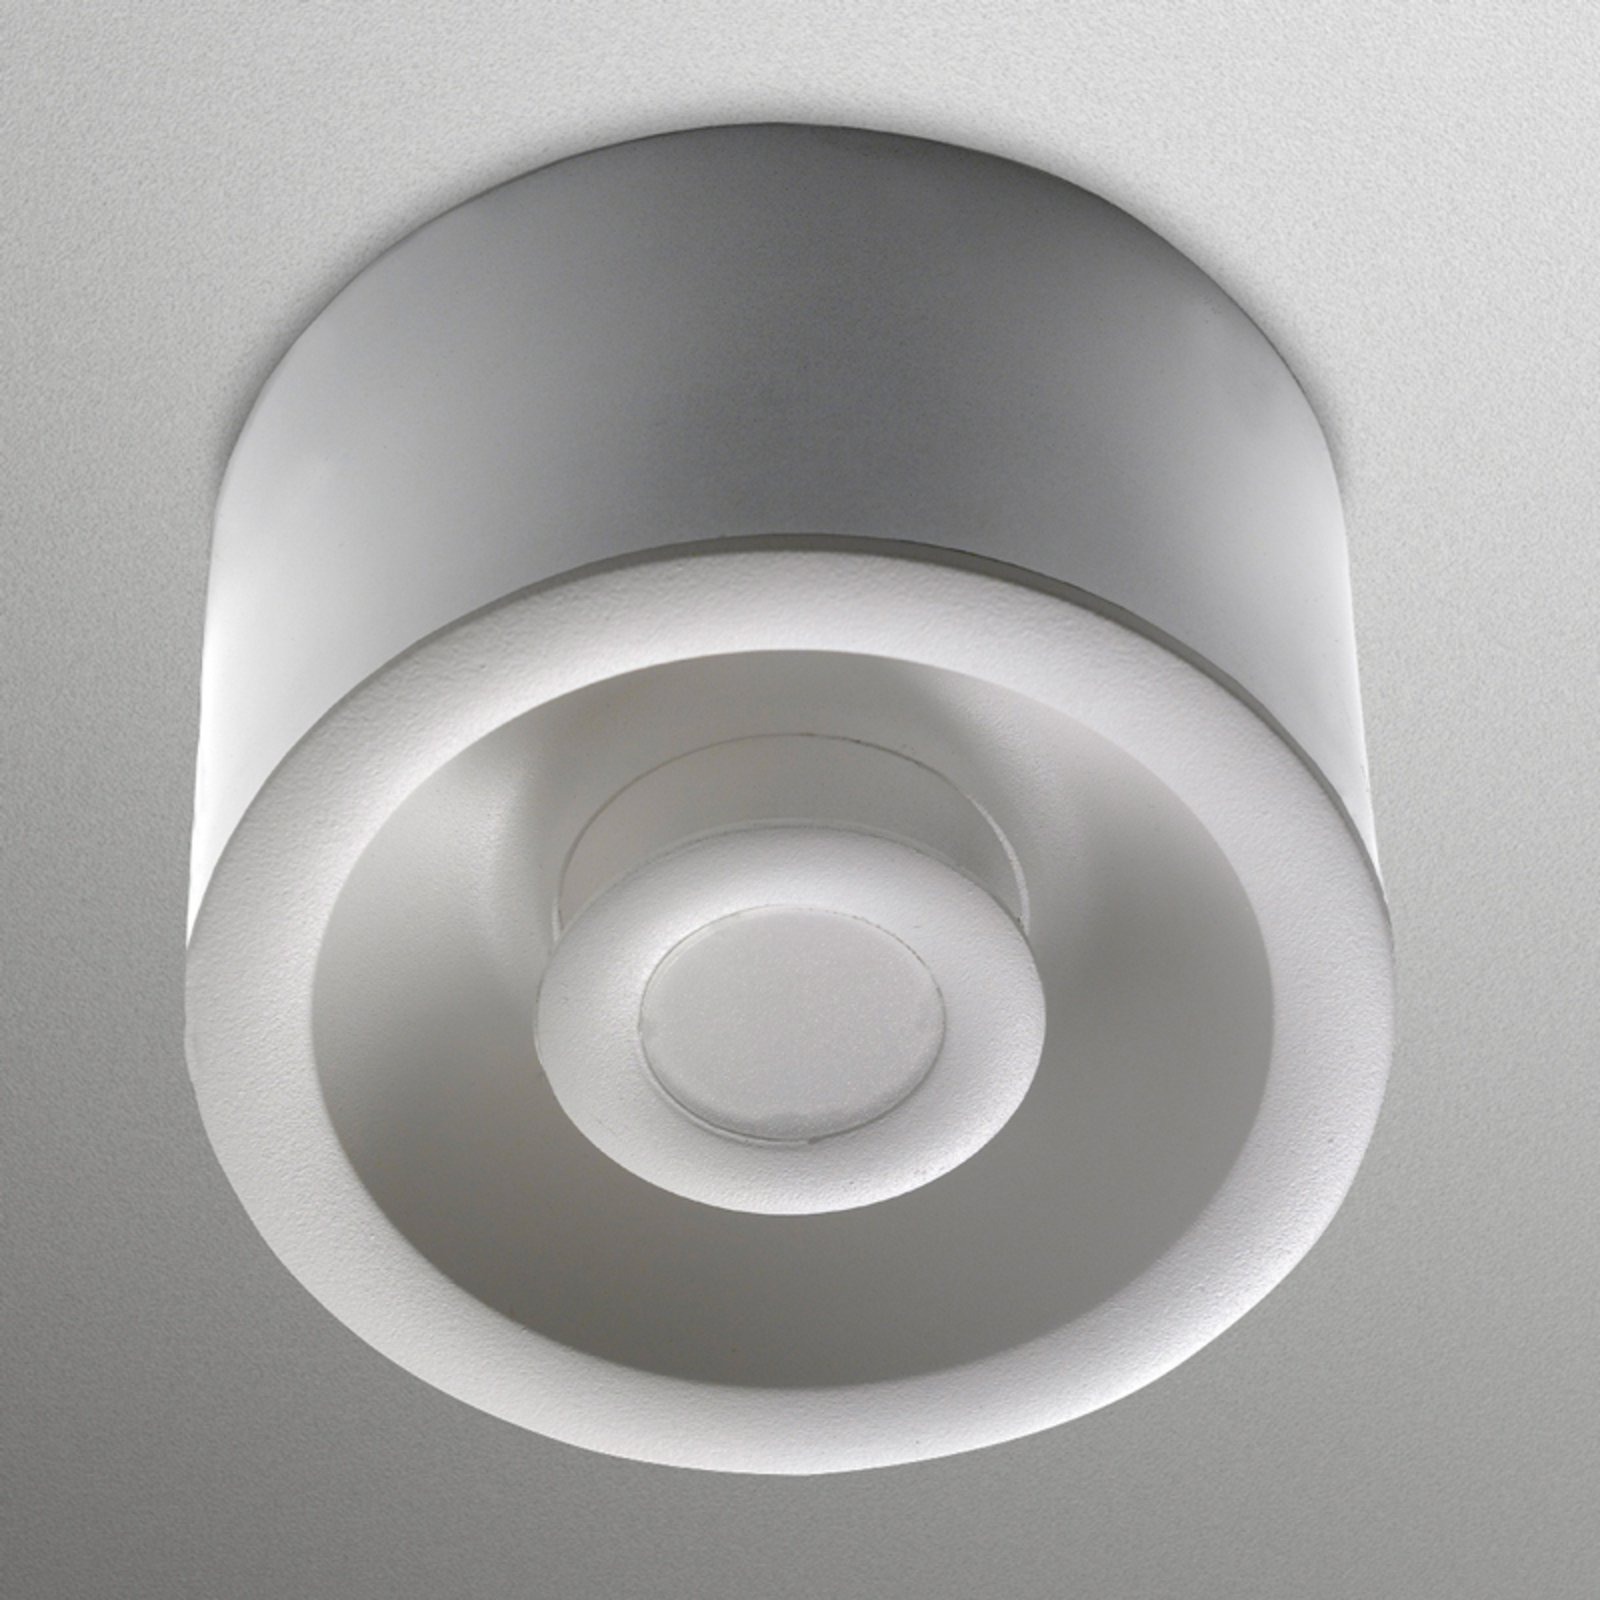 LED ceiling light Eclipse with innovative technology